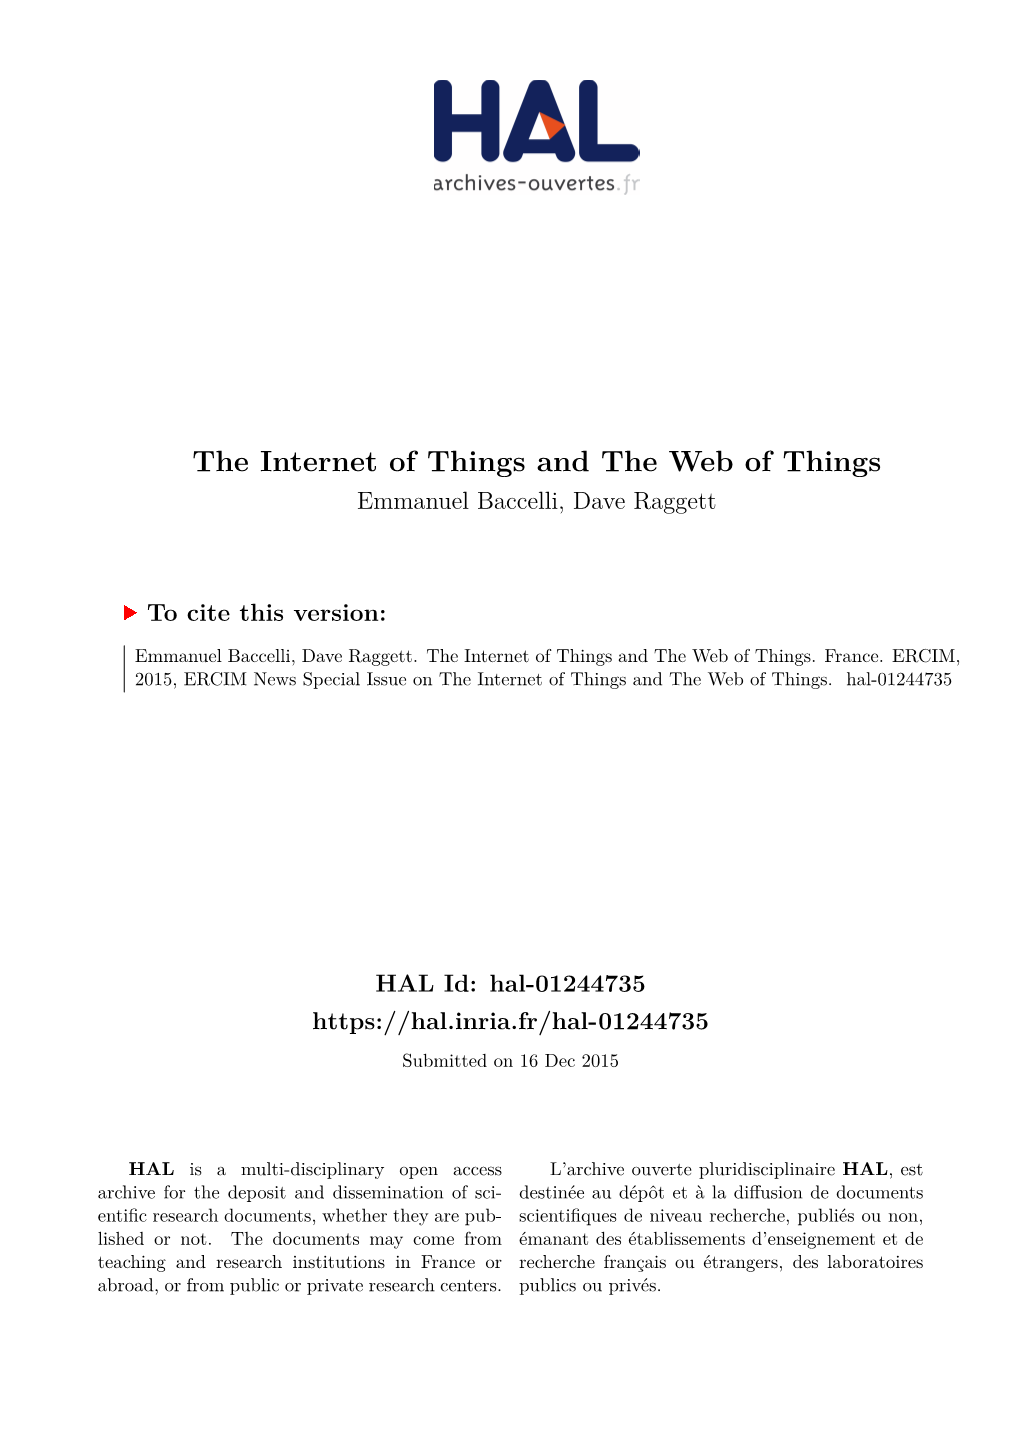 The Internet of Things and the Web of Things Emmanuel Baccelli, Dave Raggett